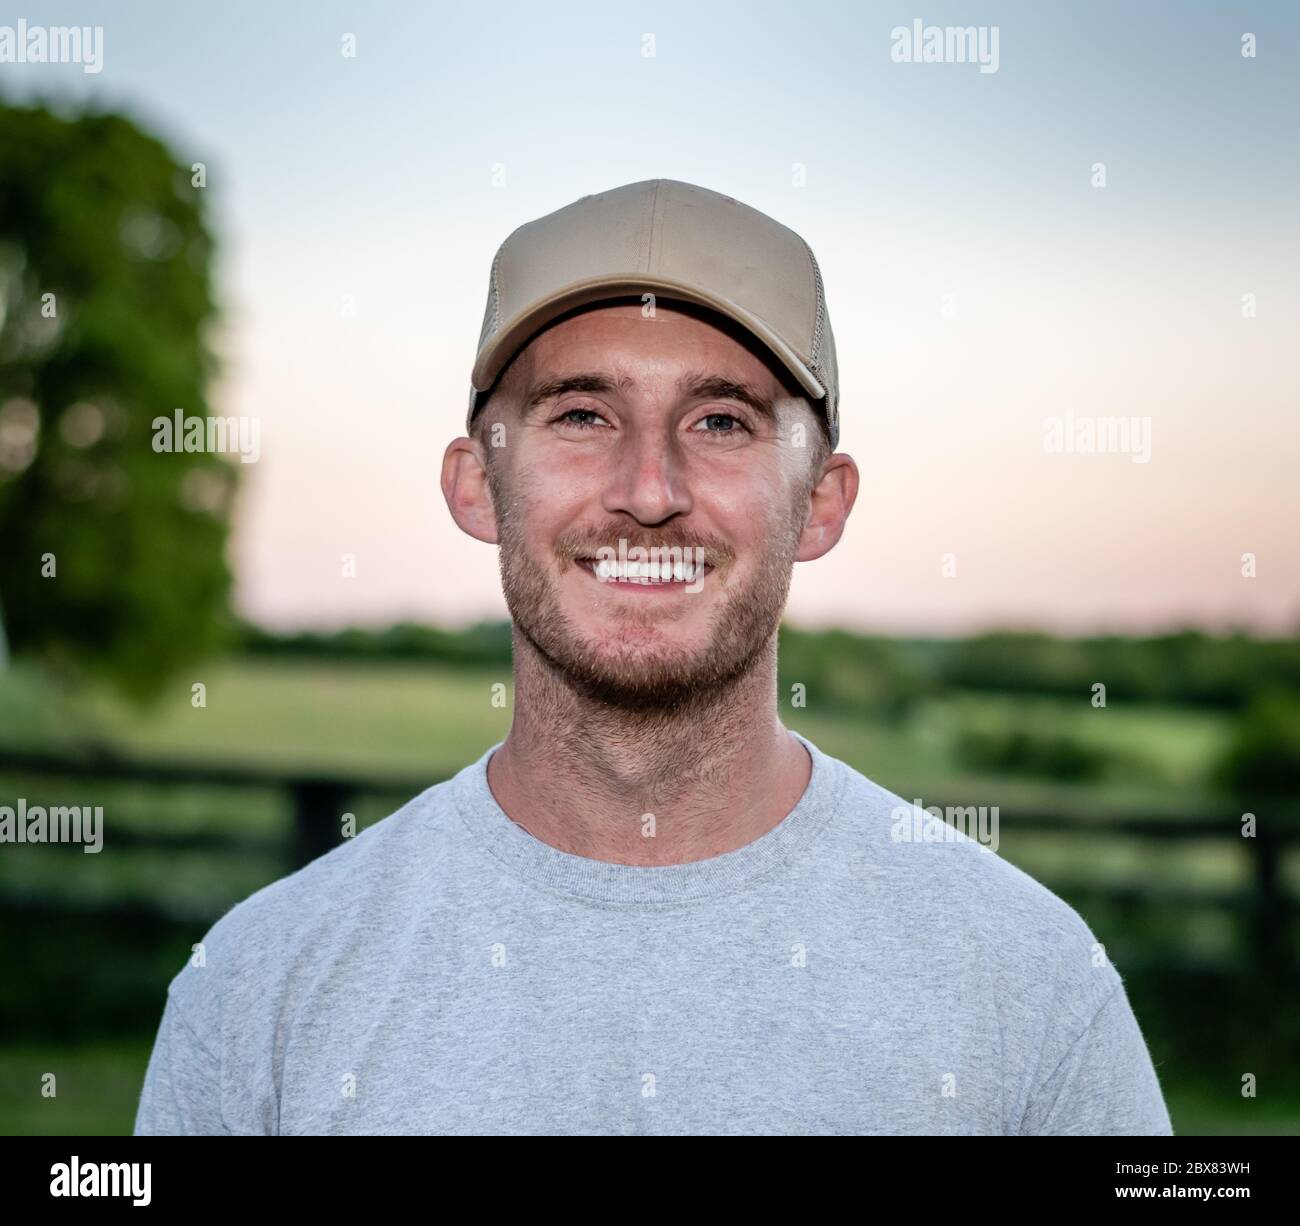 Caucasian man wearing hat/cap smiling in front of fence in Kentucky Stock  Photo - Alamy